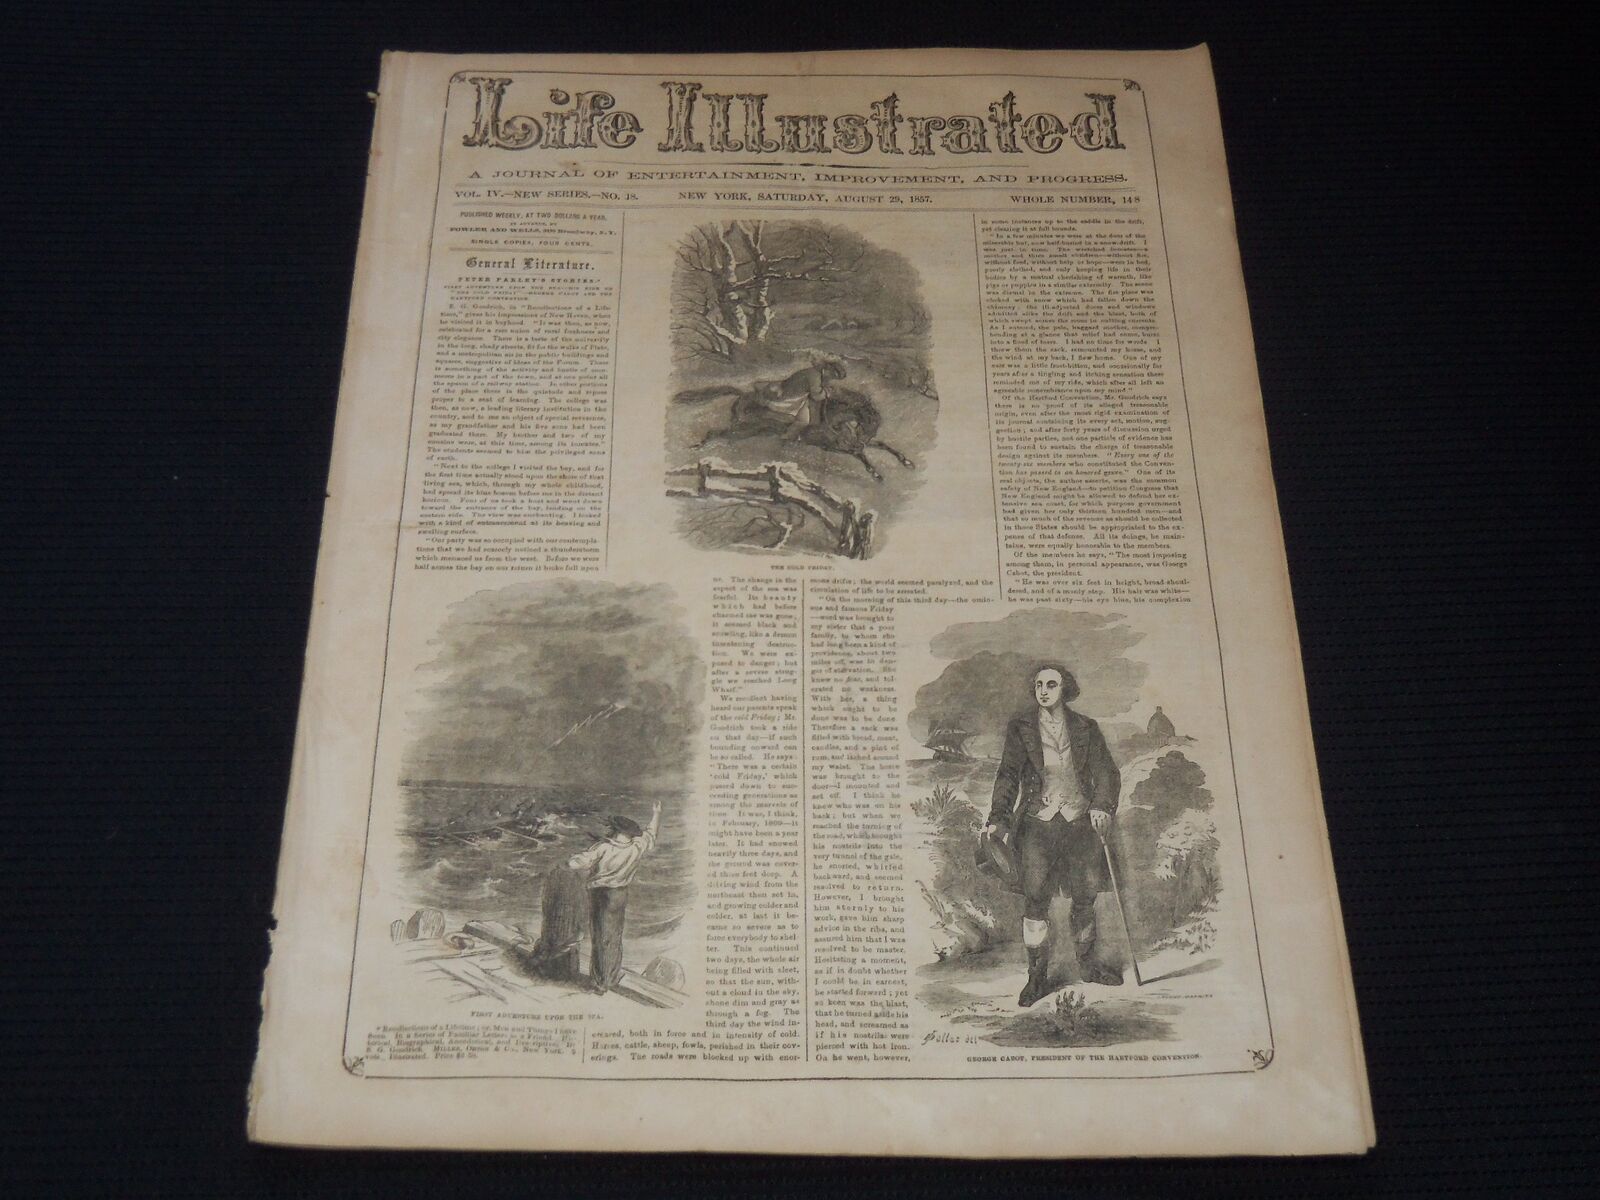 1857 AUGUST 29 LIFE ILLUSTRATED NEWSPAPER - PETER PARLEY\'S STORIES - NP 5919